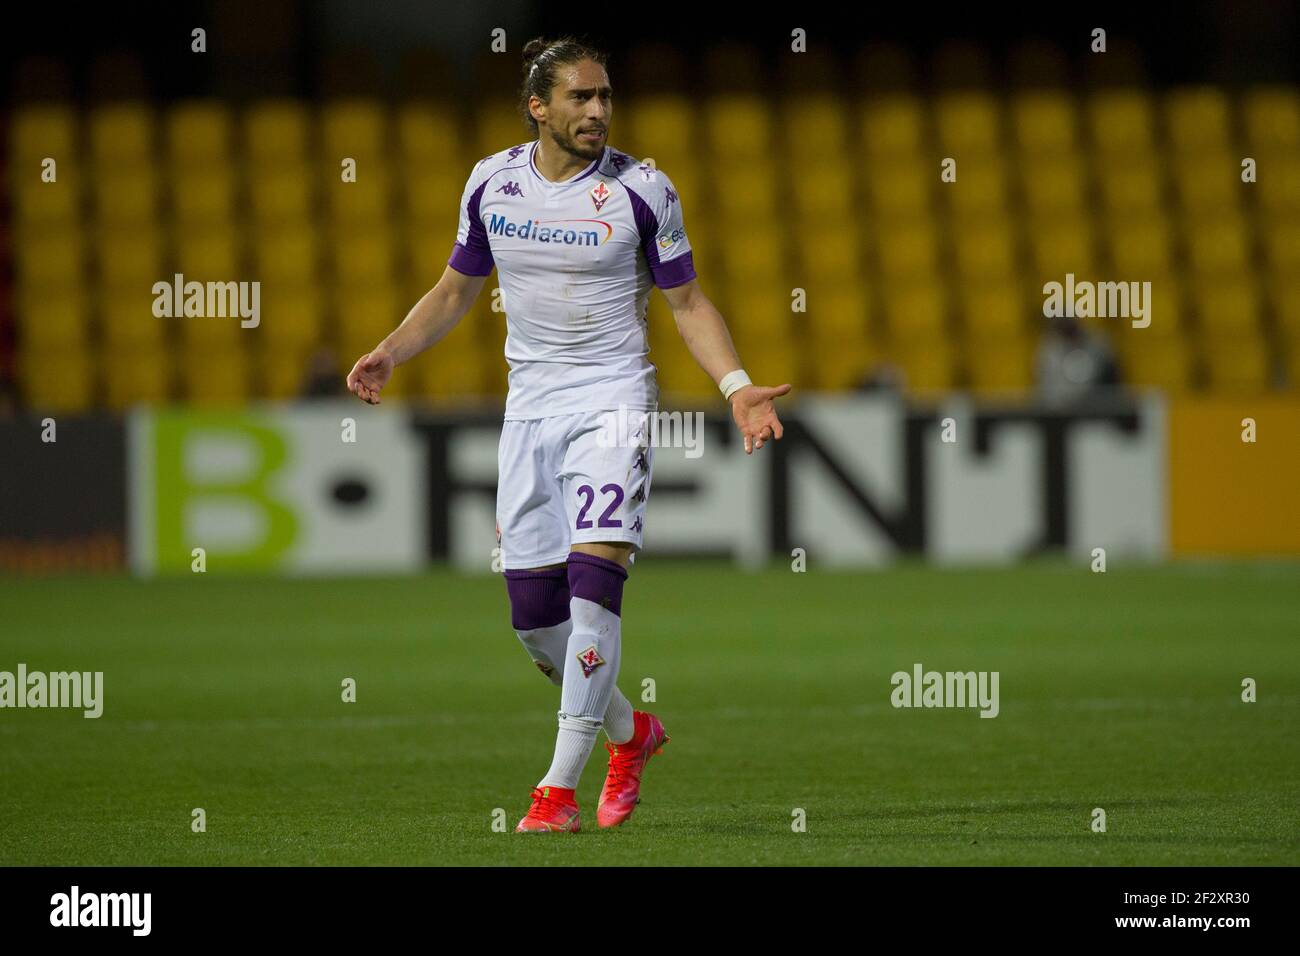 Benevento, Italy. 13th Mar, 2021. Martin Caceres player of Fiorentina, during the match of the Italian Serie A championship between Benevento vs Fiorentina final result 1-4, played at the Ciro Vigorito stadium in Benevento. Italy, March 13, 2021. (Photo by Vincenzo Izzo/Sipa USA) Credit: Sipa USA/Alamy Live News Stock Photo